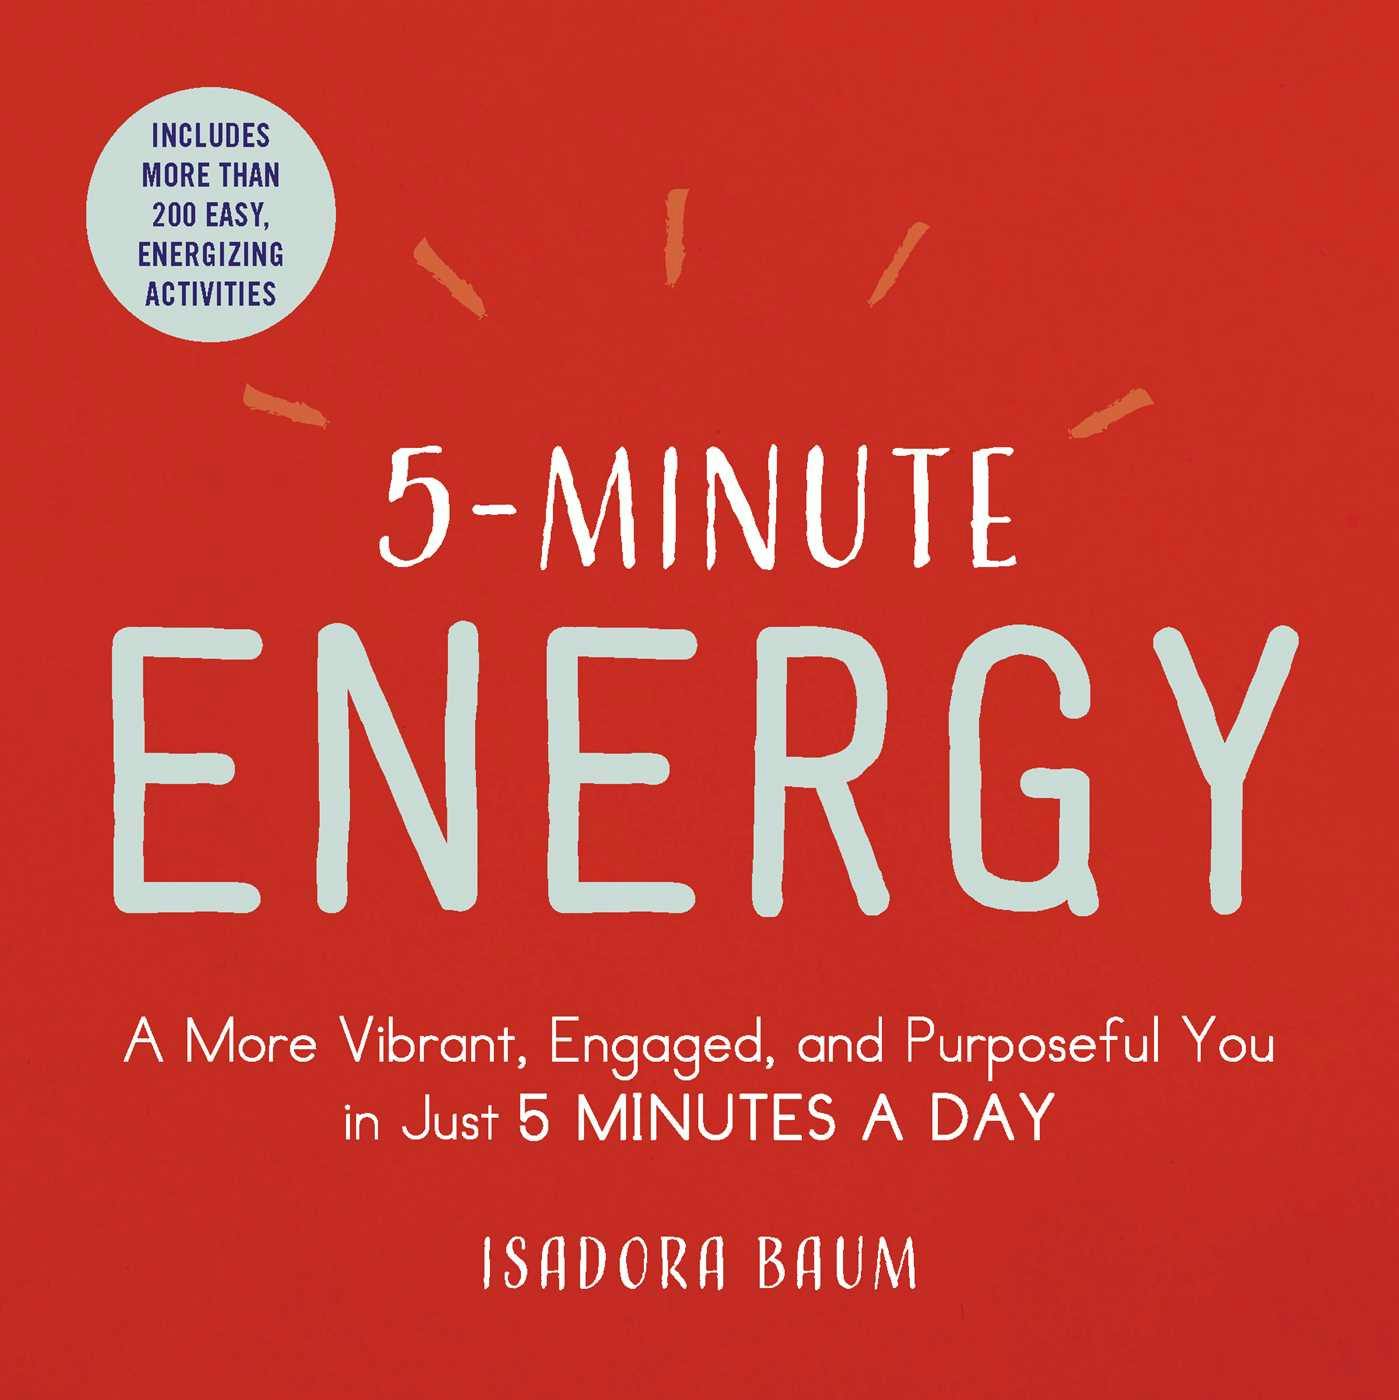 5-Minute Energy: A More Vibrant, Engaged, and Purposeful You in Just 5 Minutes a Day - Isadora Baum